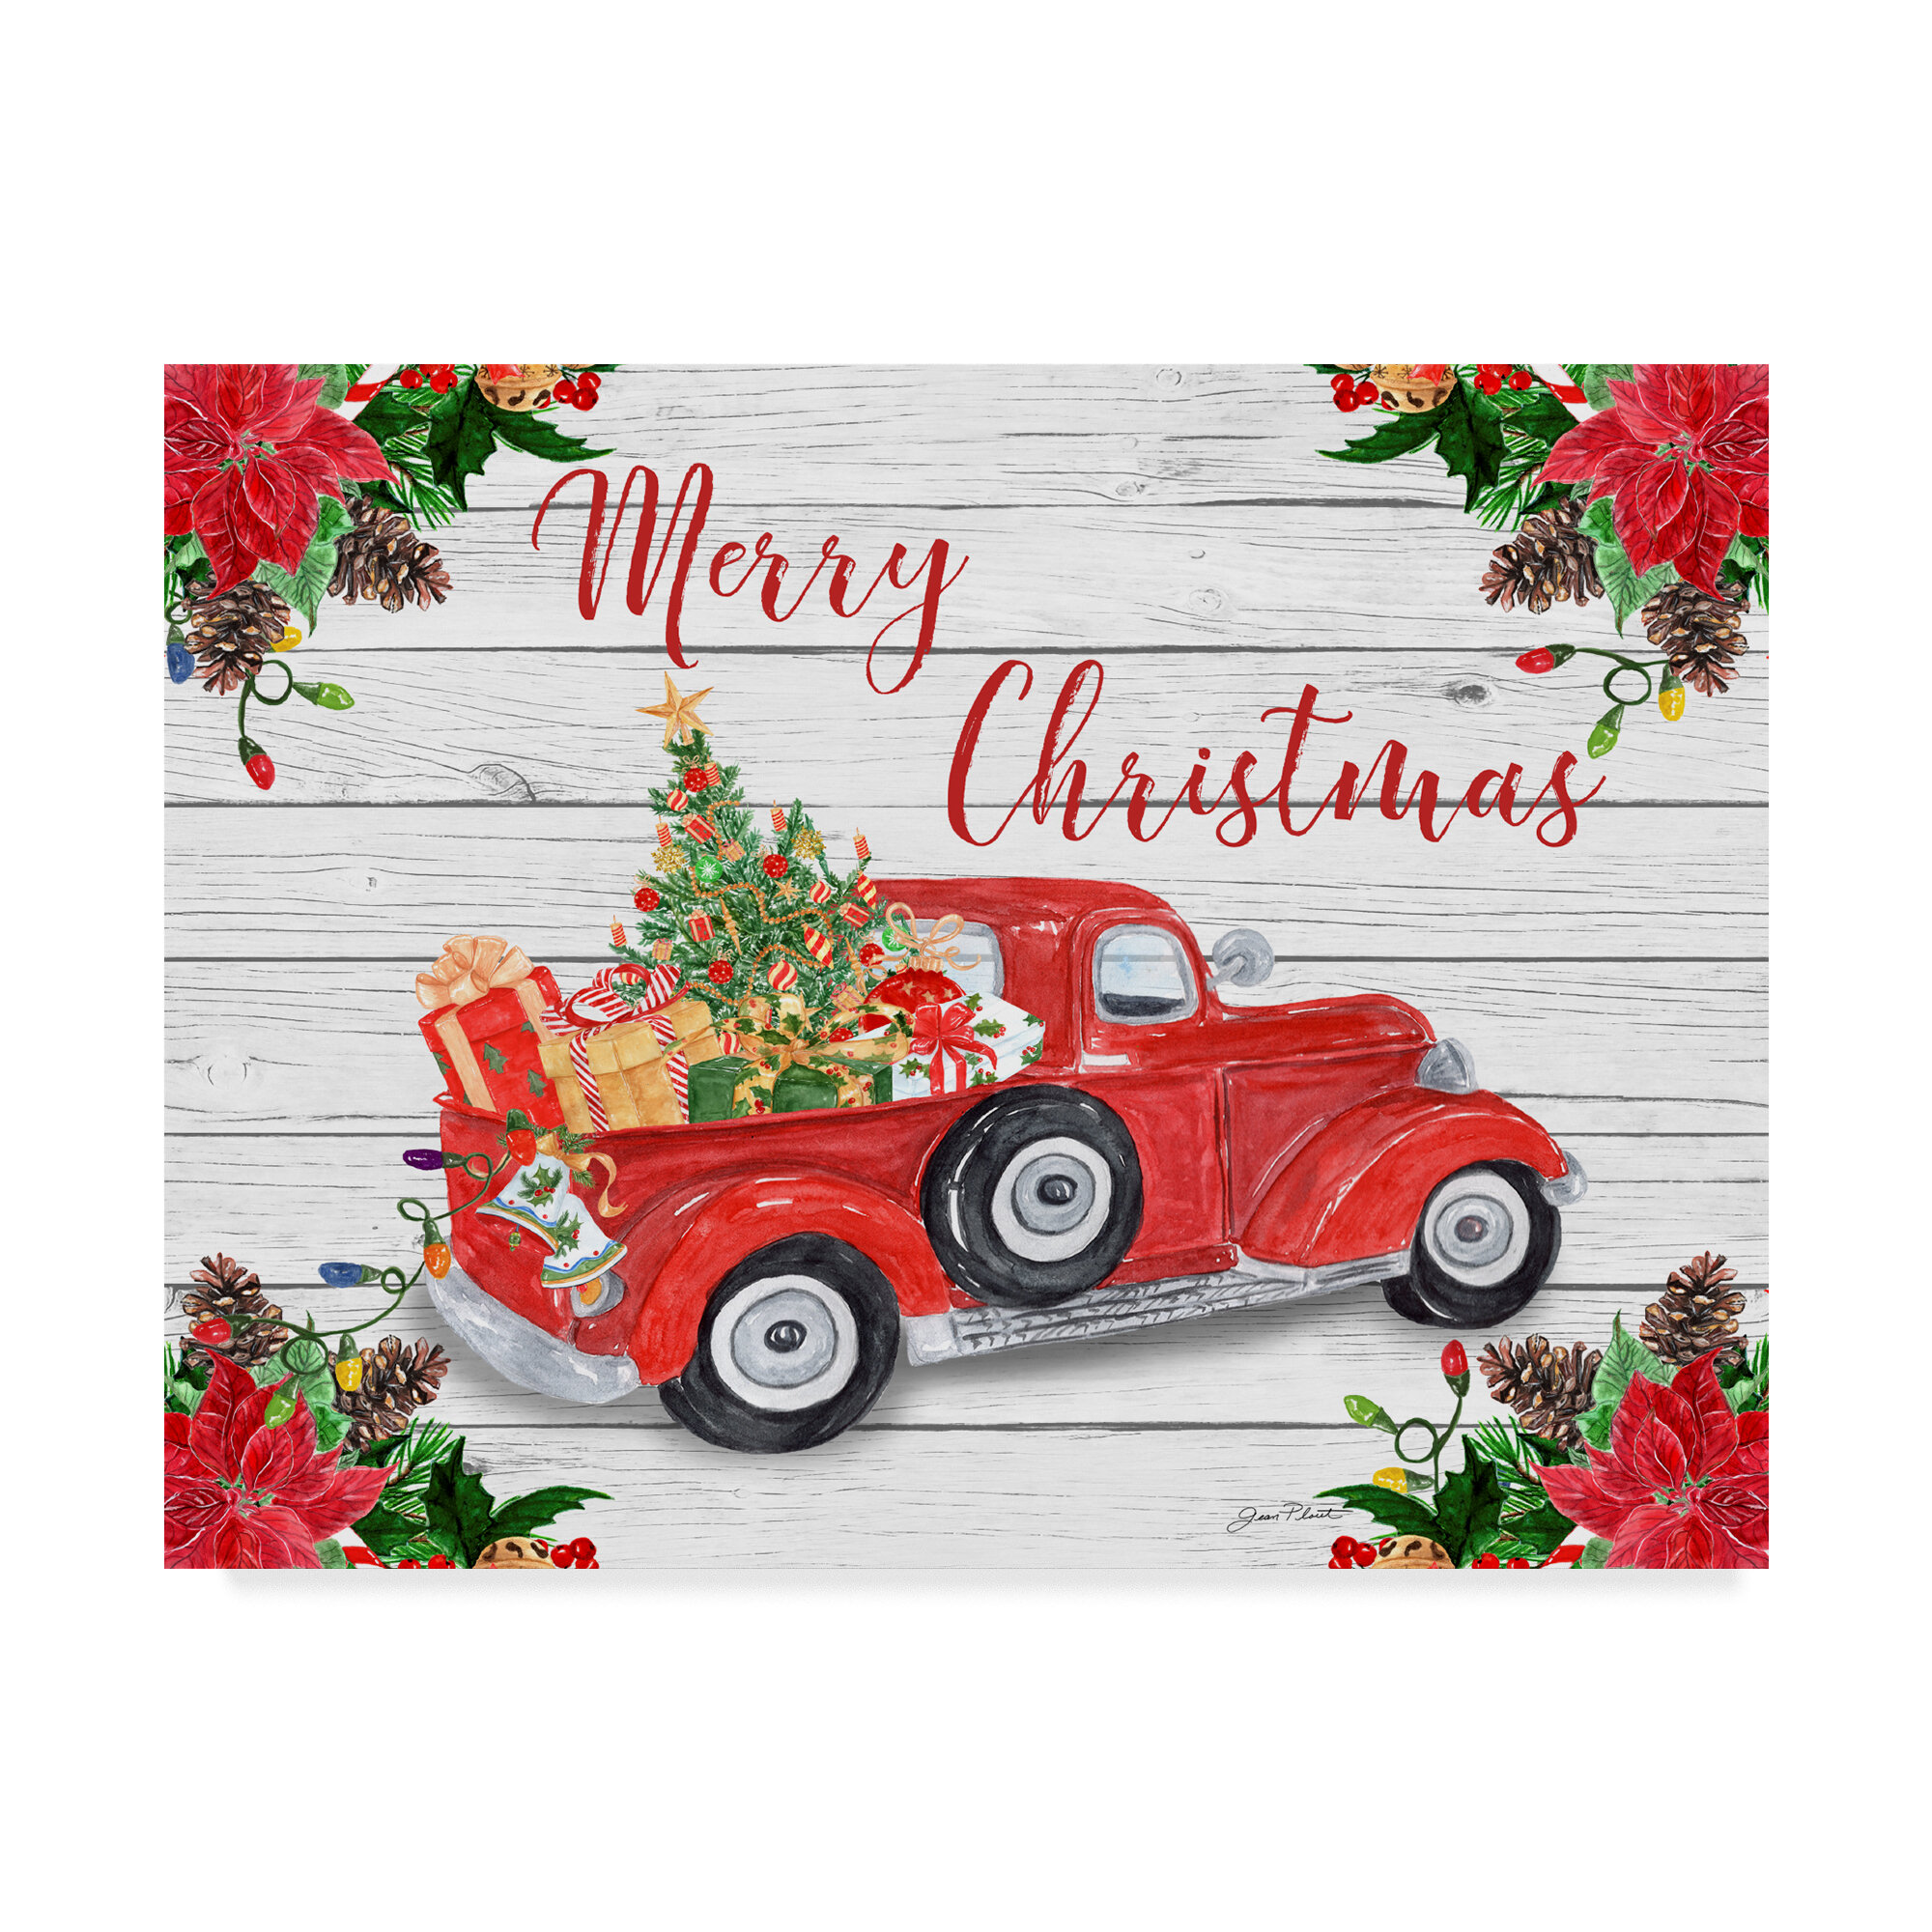 Trademark Art Vintage Red Truck Christmas Graphic Art Print On Wrapped Canvas Reviews